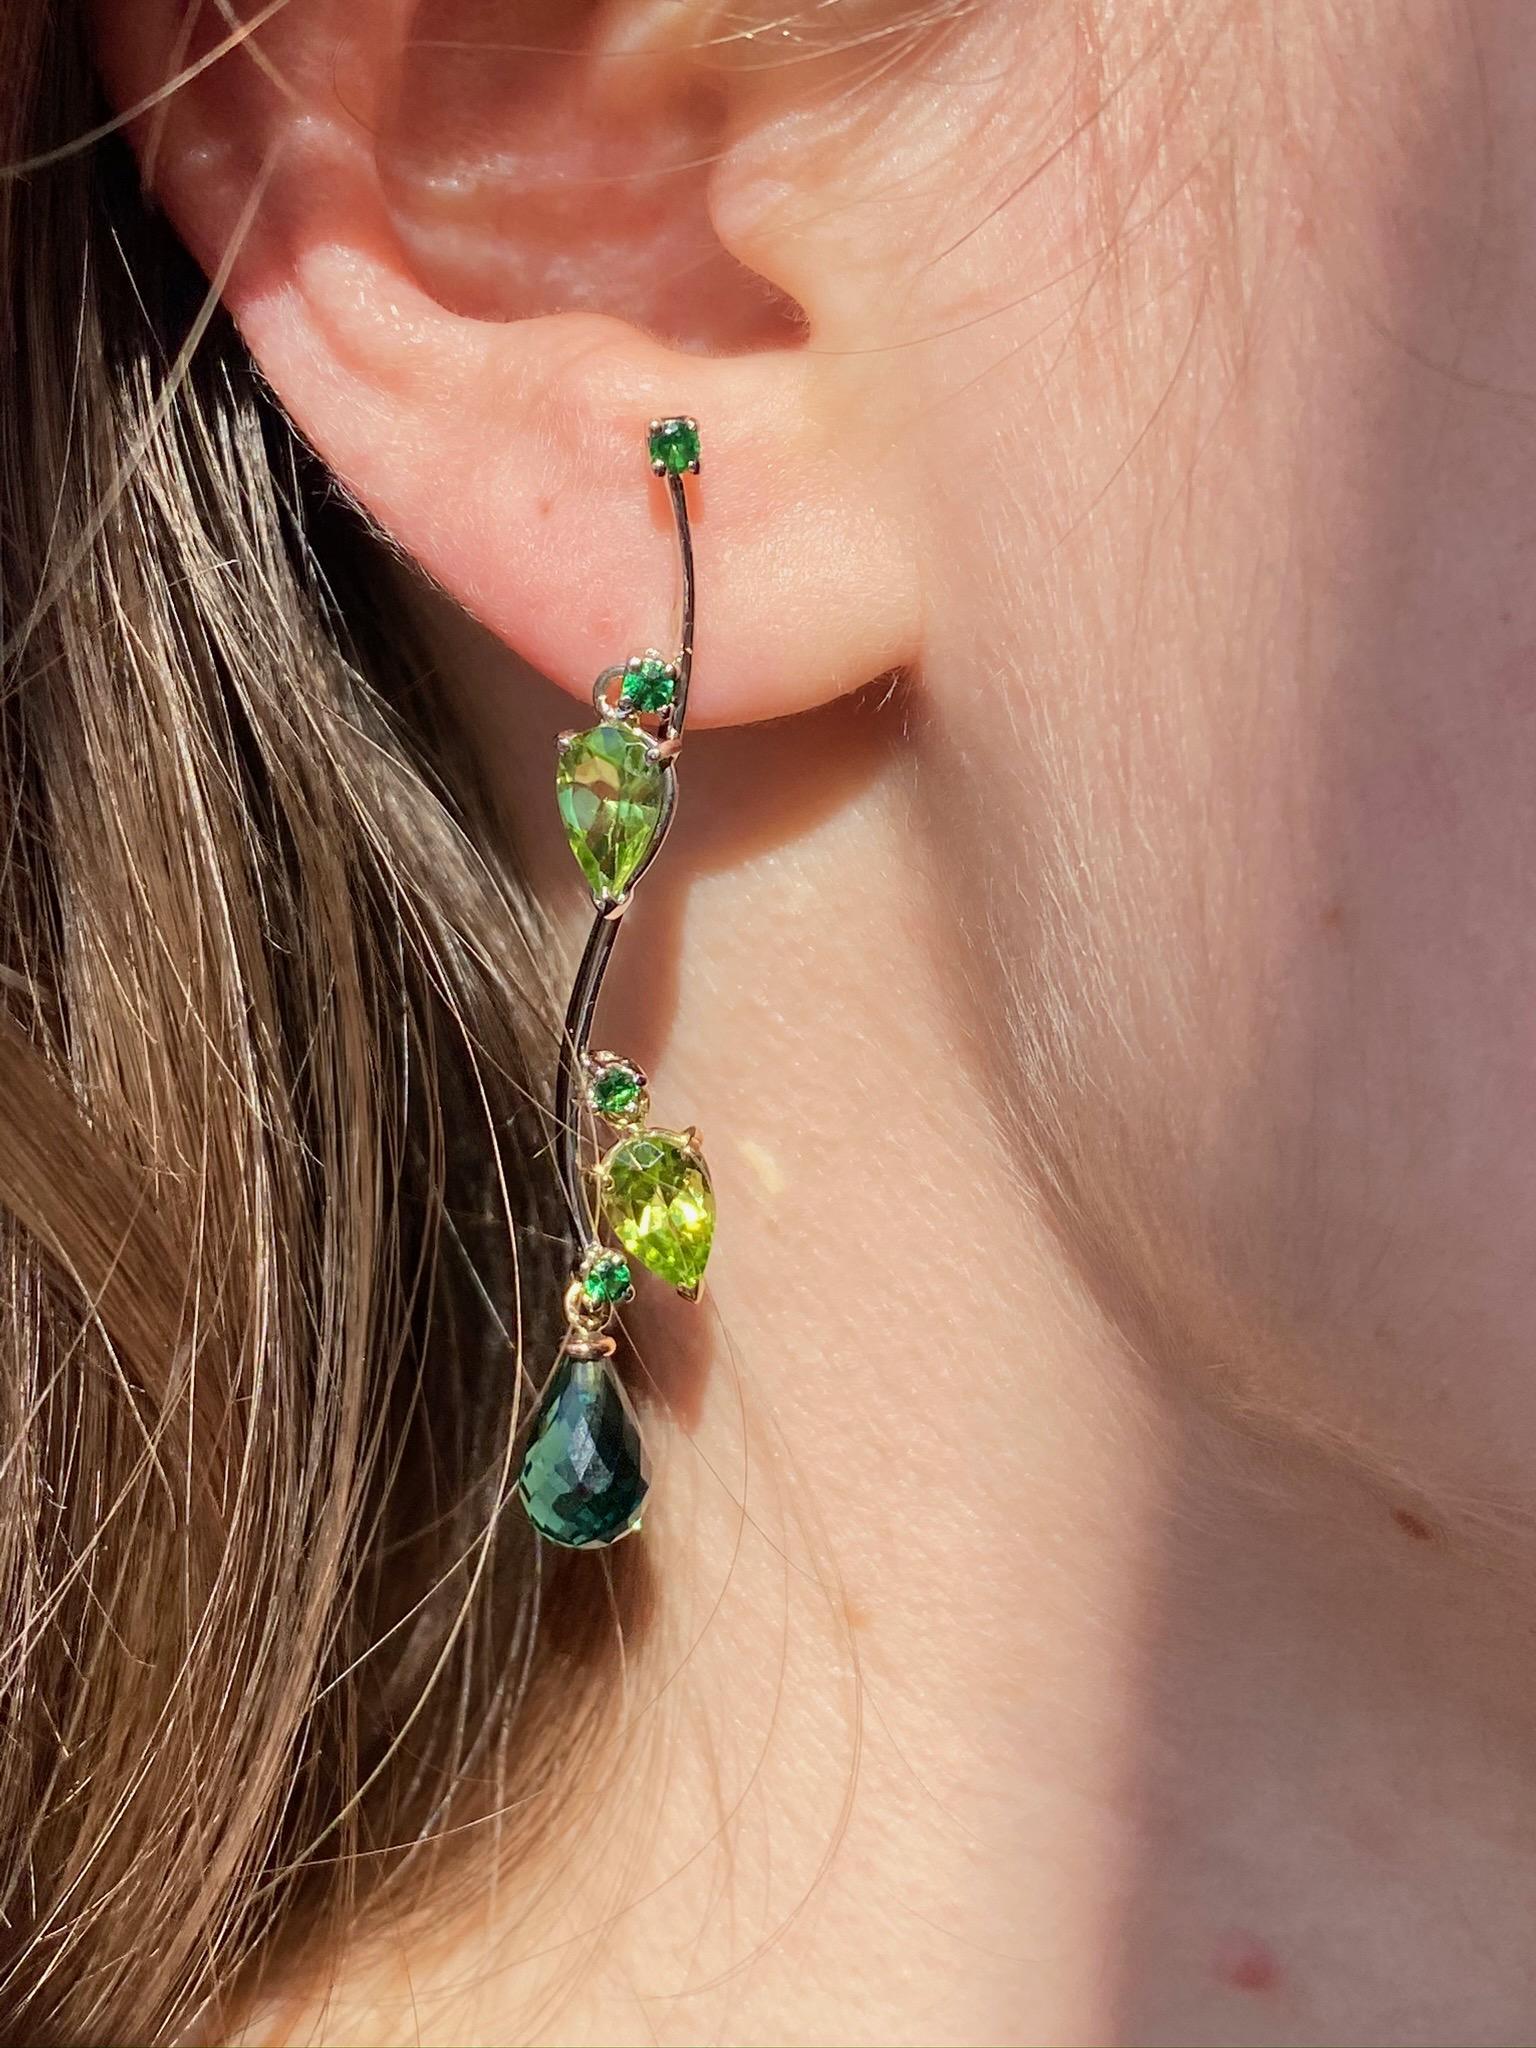 Rossella Ugolini Design Collection a Modern Style dangle earrings handcrafted in 18 Karats Gold with three shade of green colors:  Peridot pear cut,  Tsavorite round cut , green Tourmaline Briolet drops.  The branches of the trees of Villa Borghese